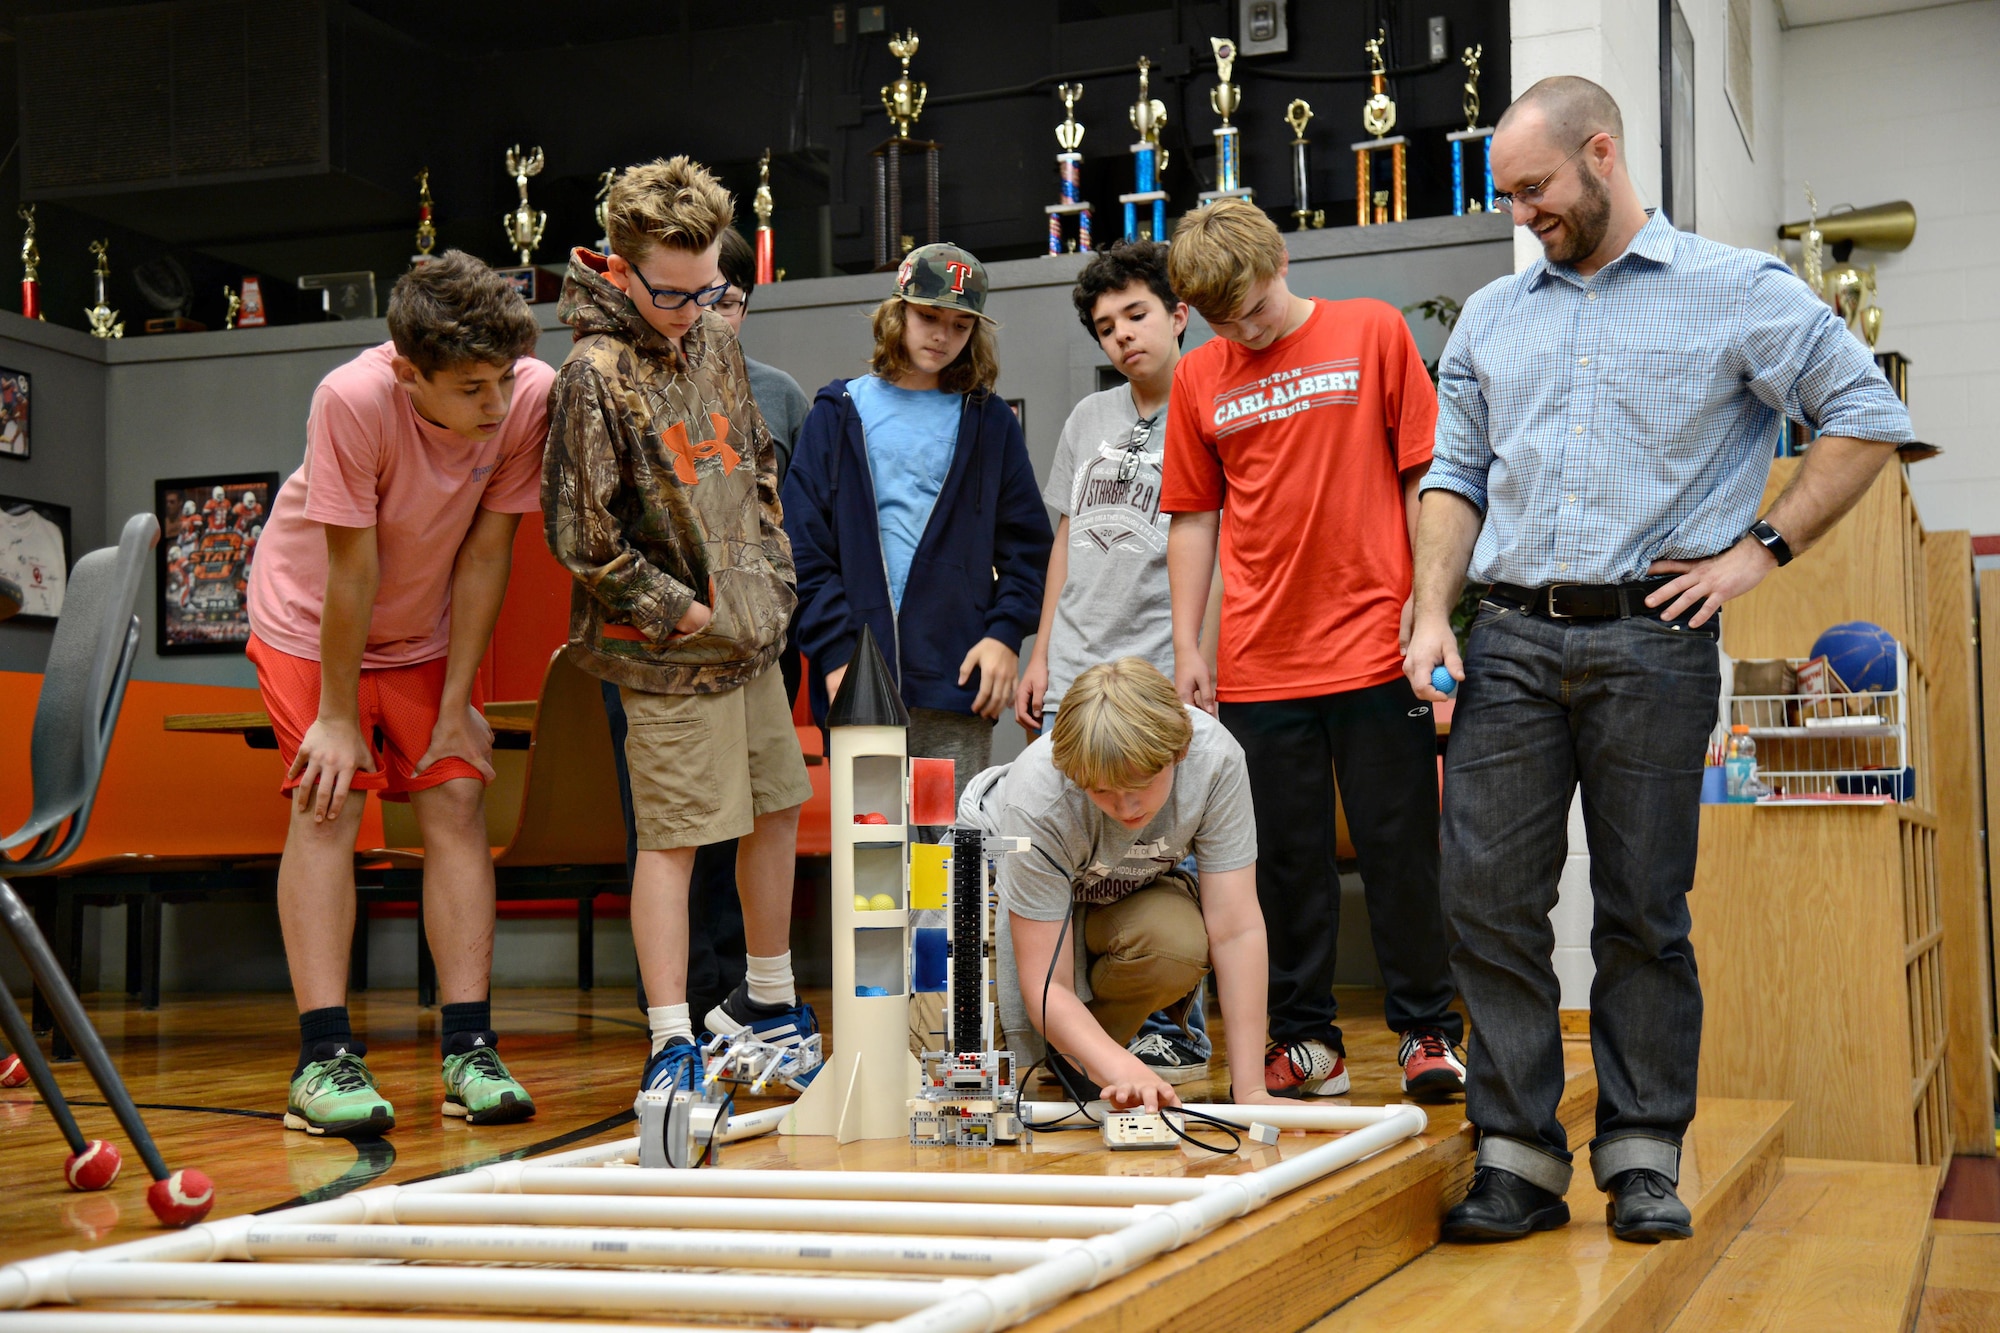 Chad Unruh, right, electronics engineer with the 555th Software Maintenance Squadron, watches students from Carl Albert Middle School as they attempt to make their robotics project work. The seventh and eighth grade students meet twice a week with STARBASE and Tinker mentors to learn about STEM related subjects. Unruh has volunteered with STARBASE for four years and was recently recognized at State Mentor Day at the Oklahoma State Capitol as an outstanding mentor. (Air Force photo by Kelly White)